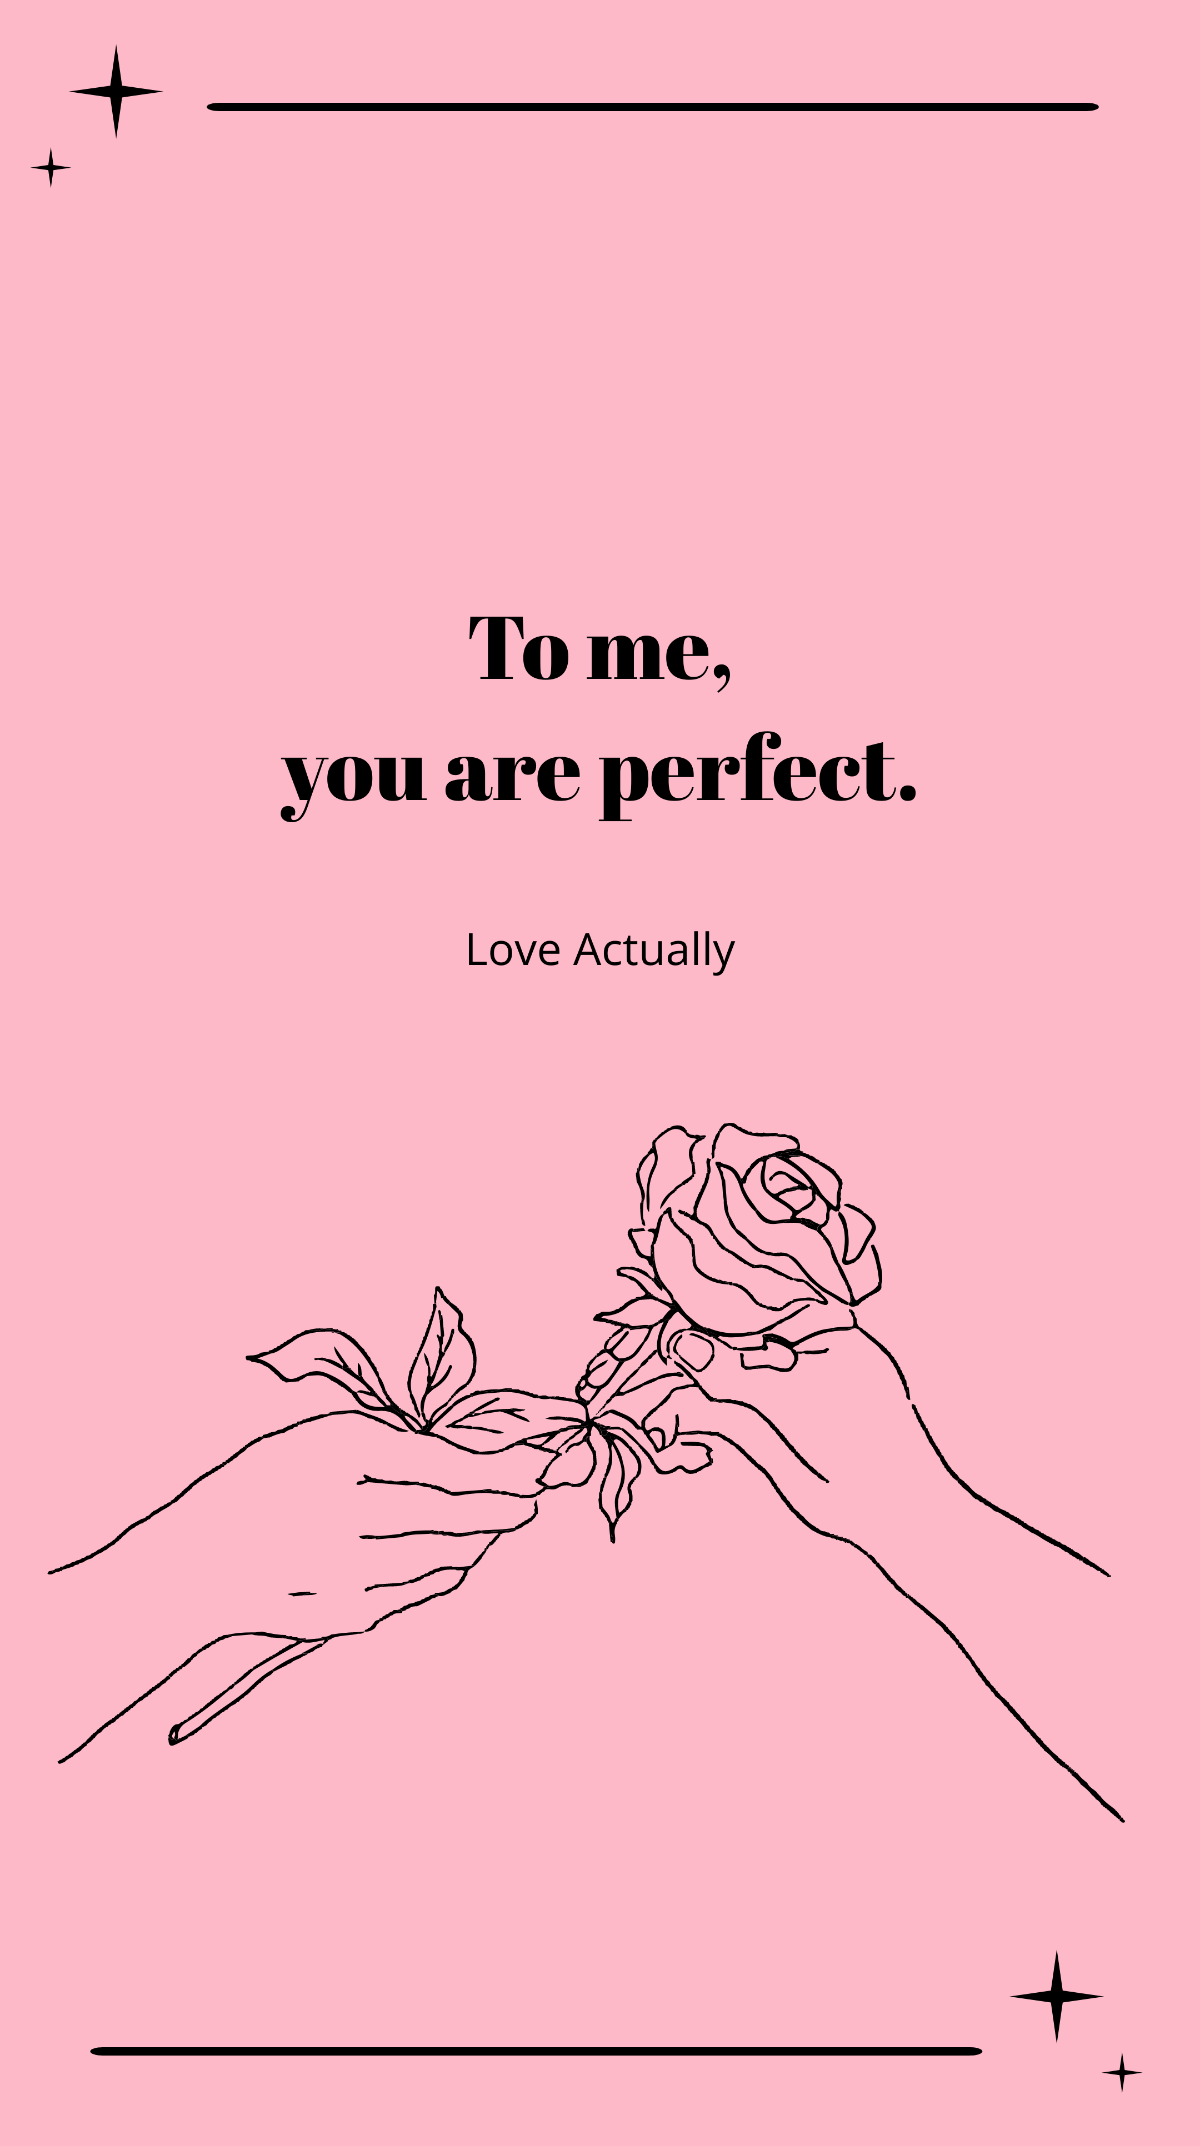 Love Actually - “To me, you are perfect.” Template